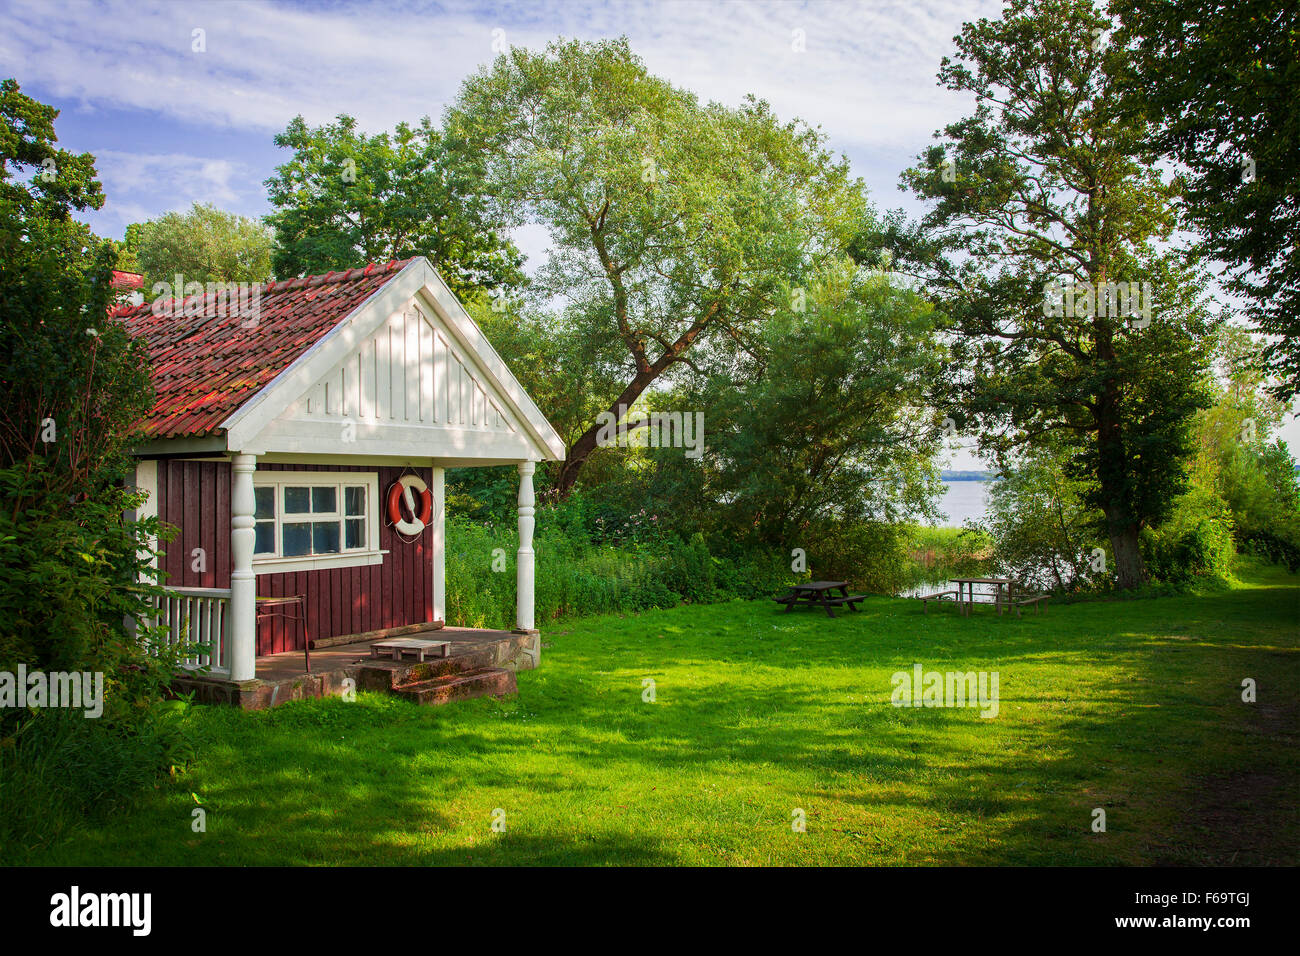 Image of a quaint red summer cottage. Rural Sweden. Stock Photo